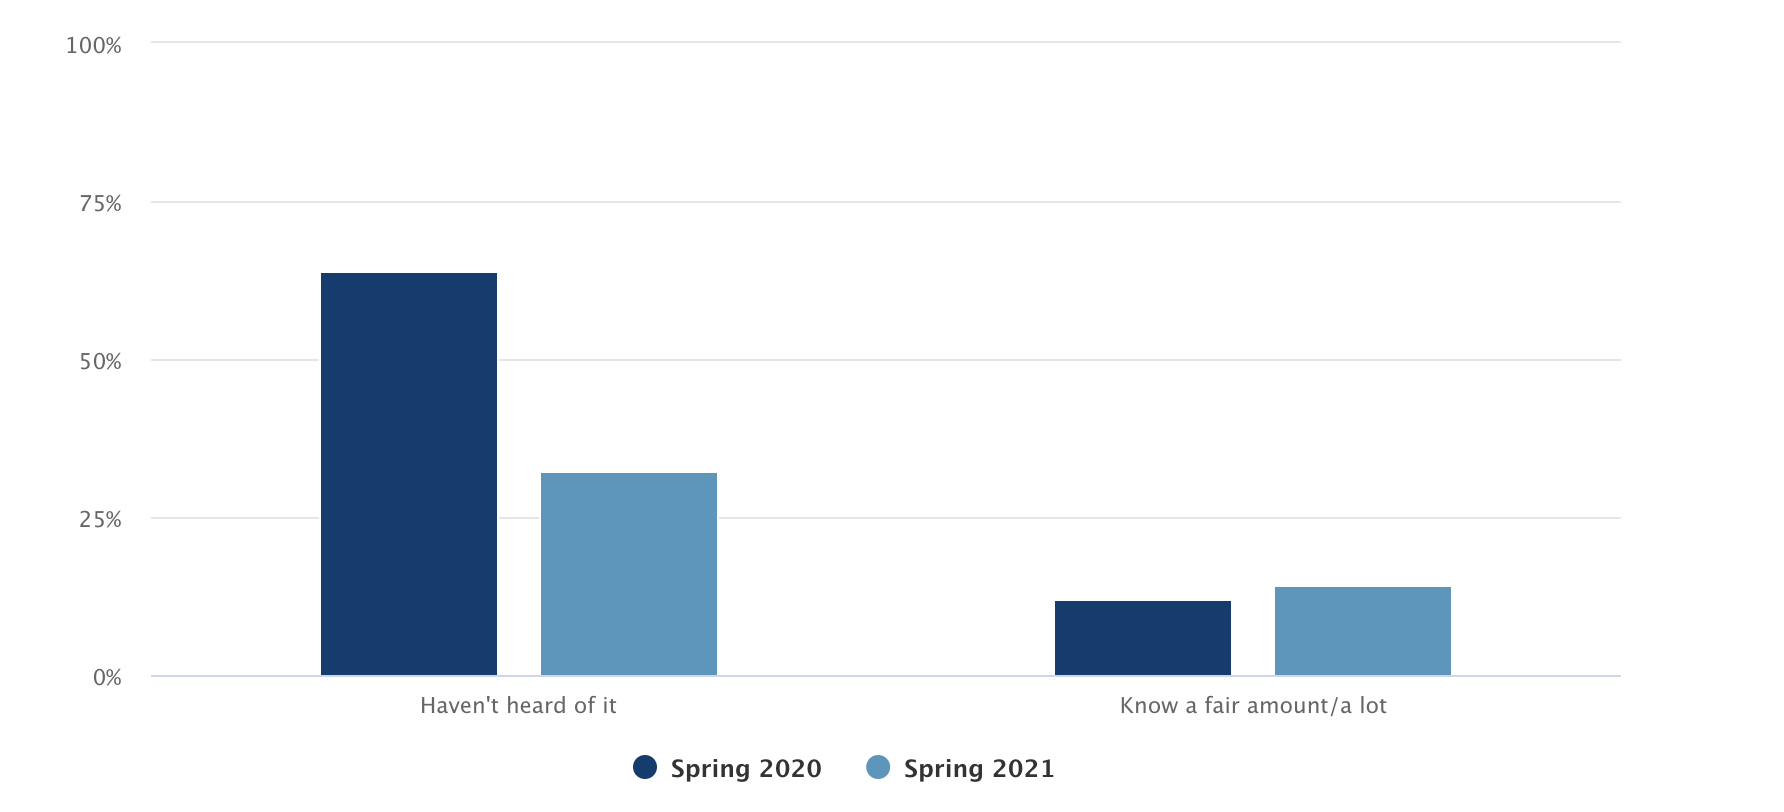 Net-zero knowledge in spring 2020 and spring 2021